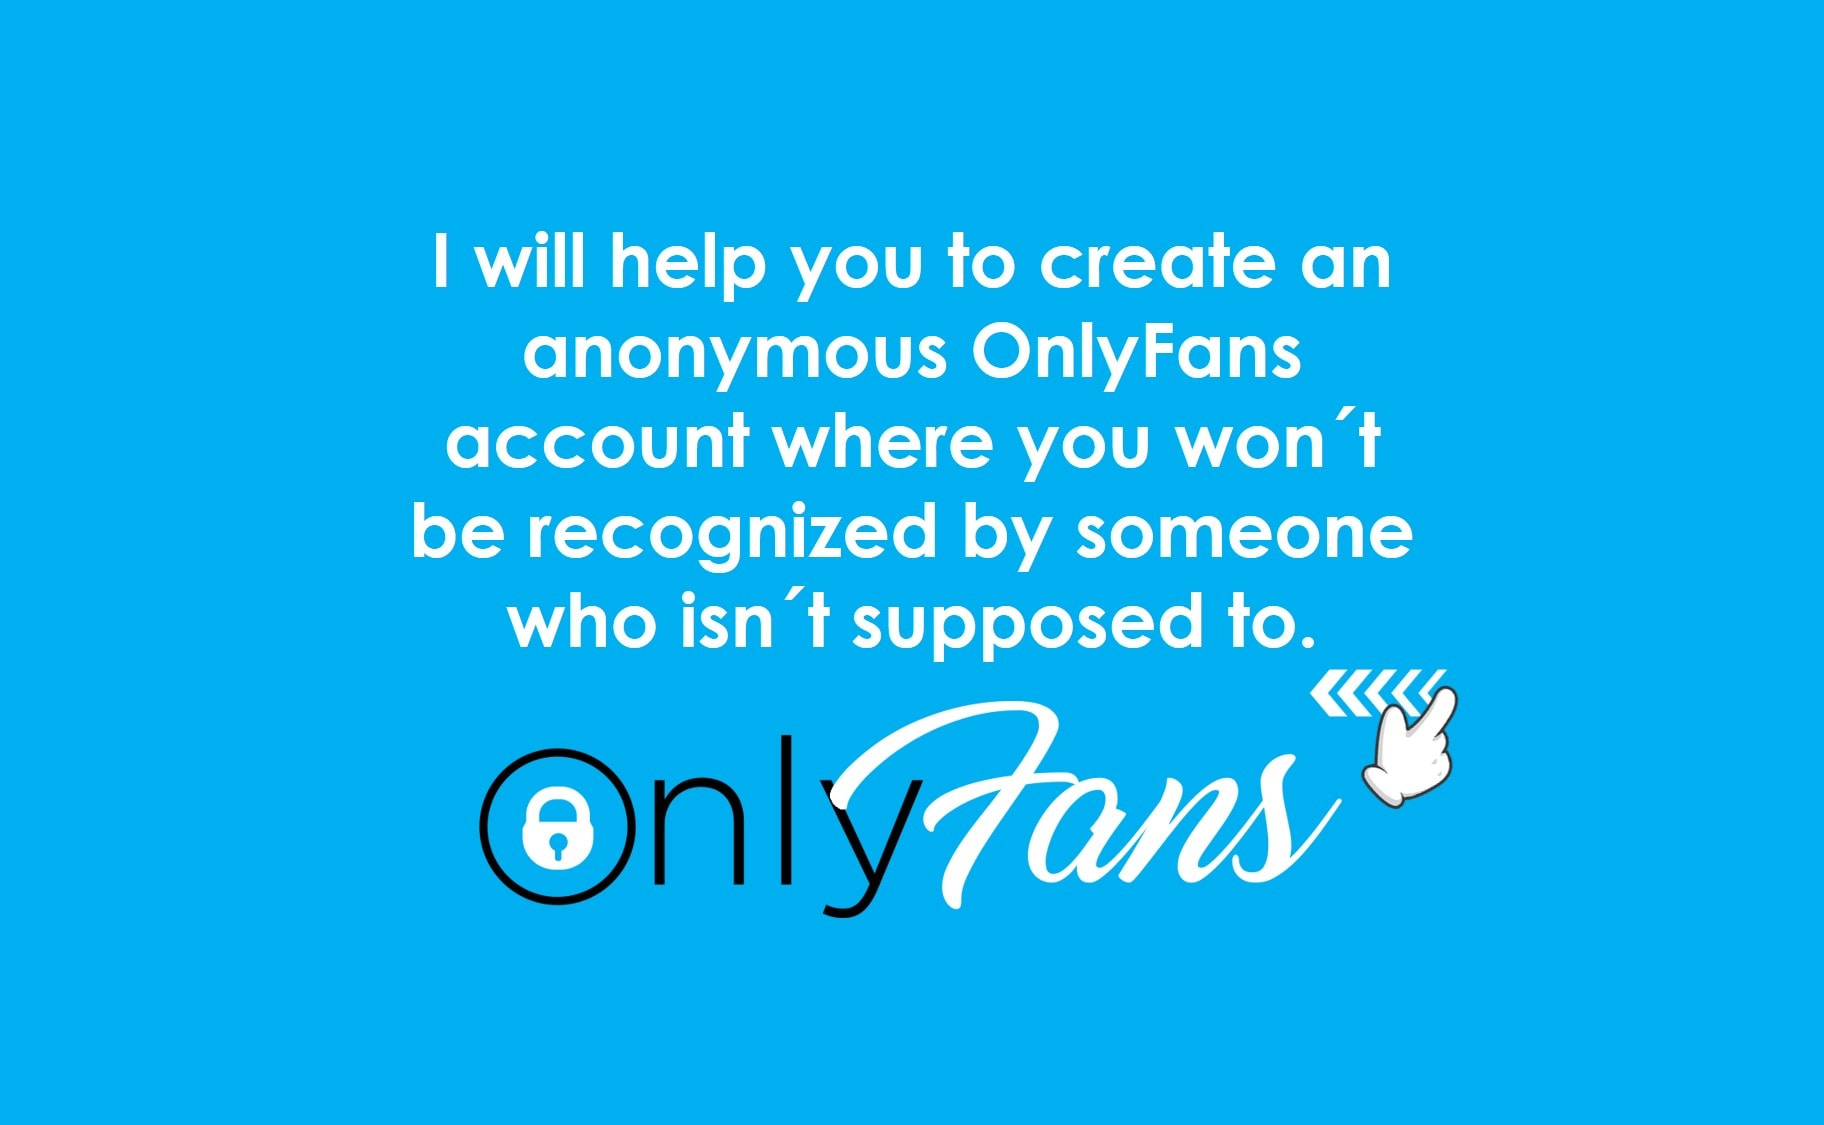 Only fans anonymity